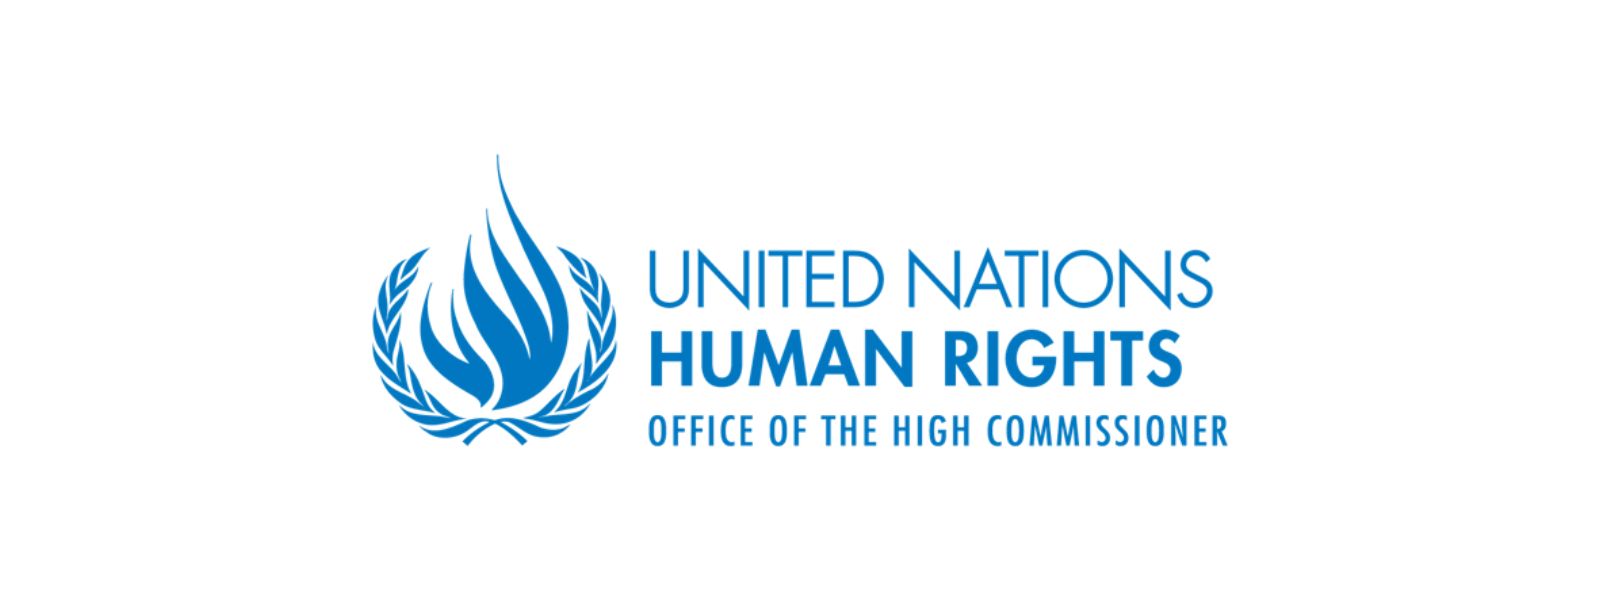 UN Warns Online Safety Act Threatens Human Rights